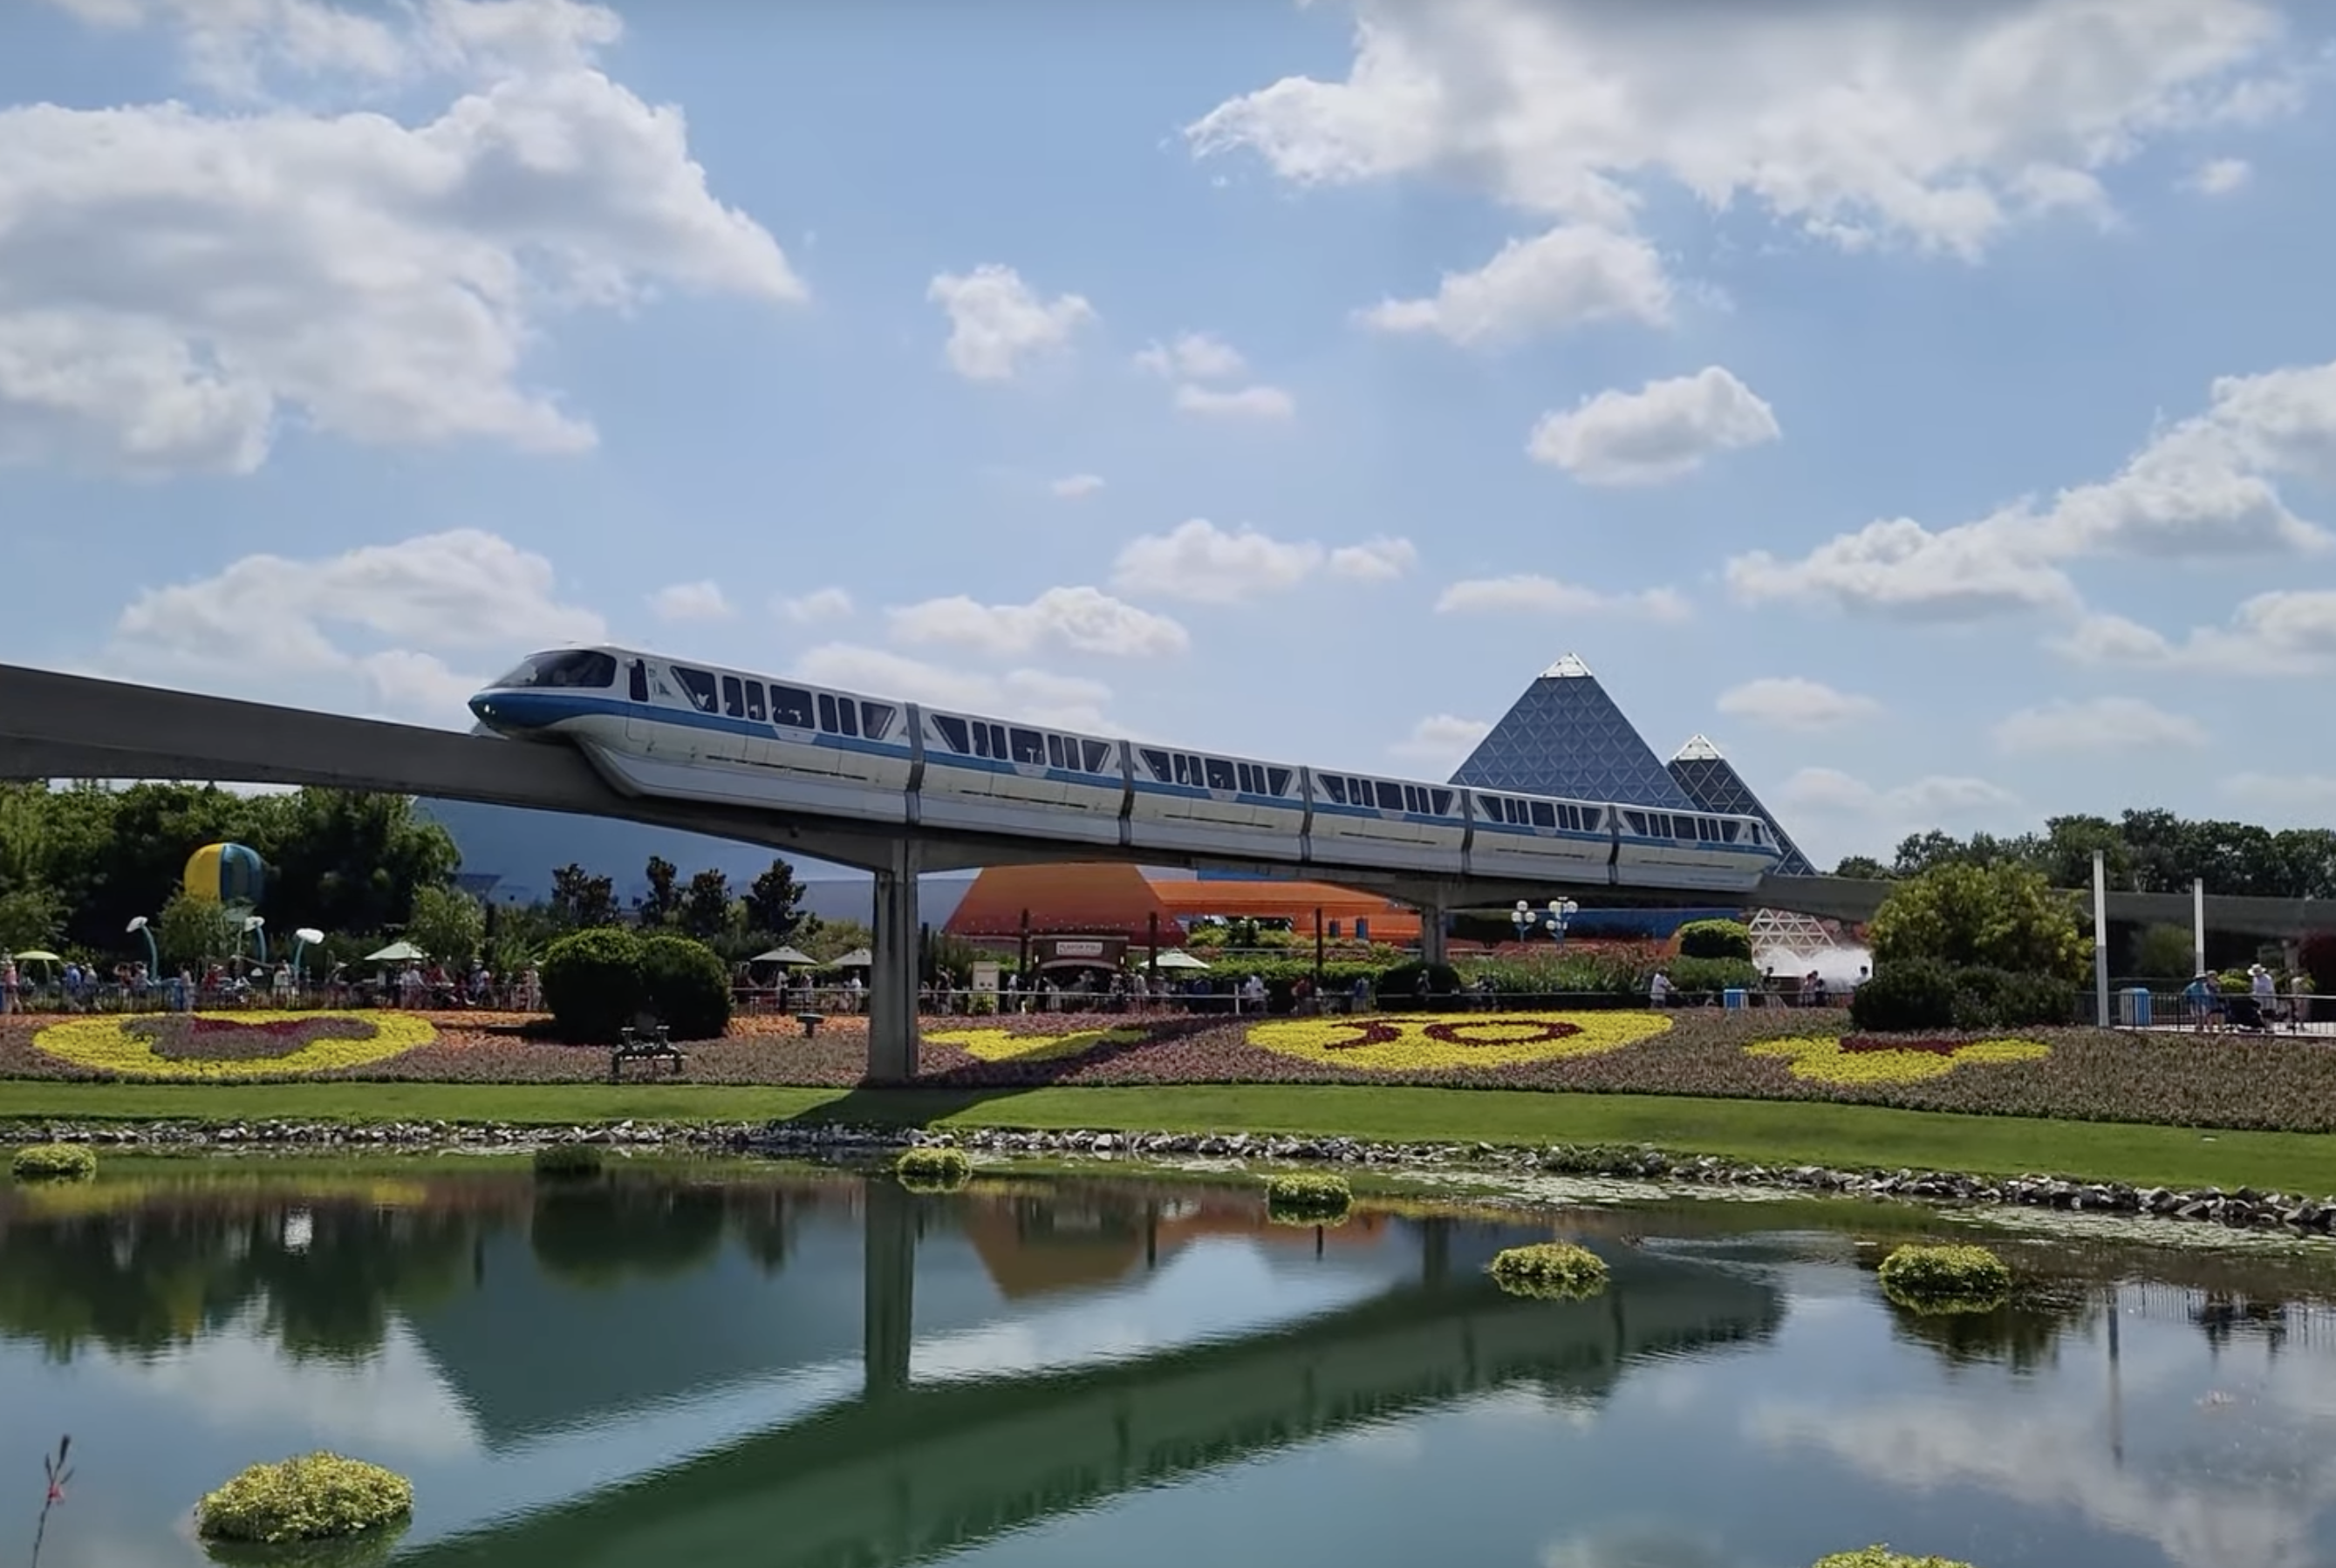 Disney World Monorail Evacuated, Possible Explosion